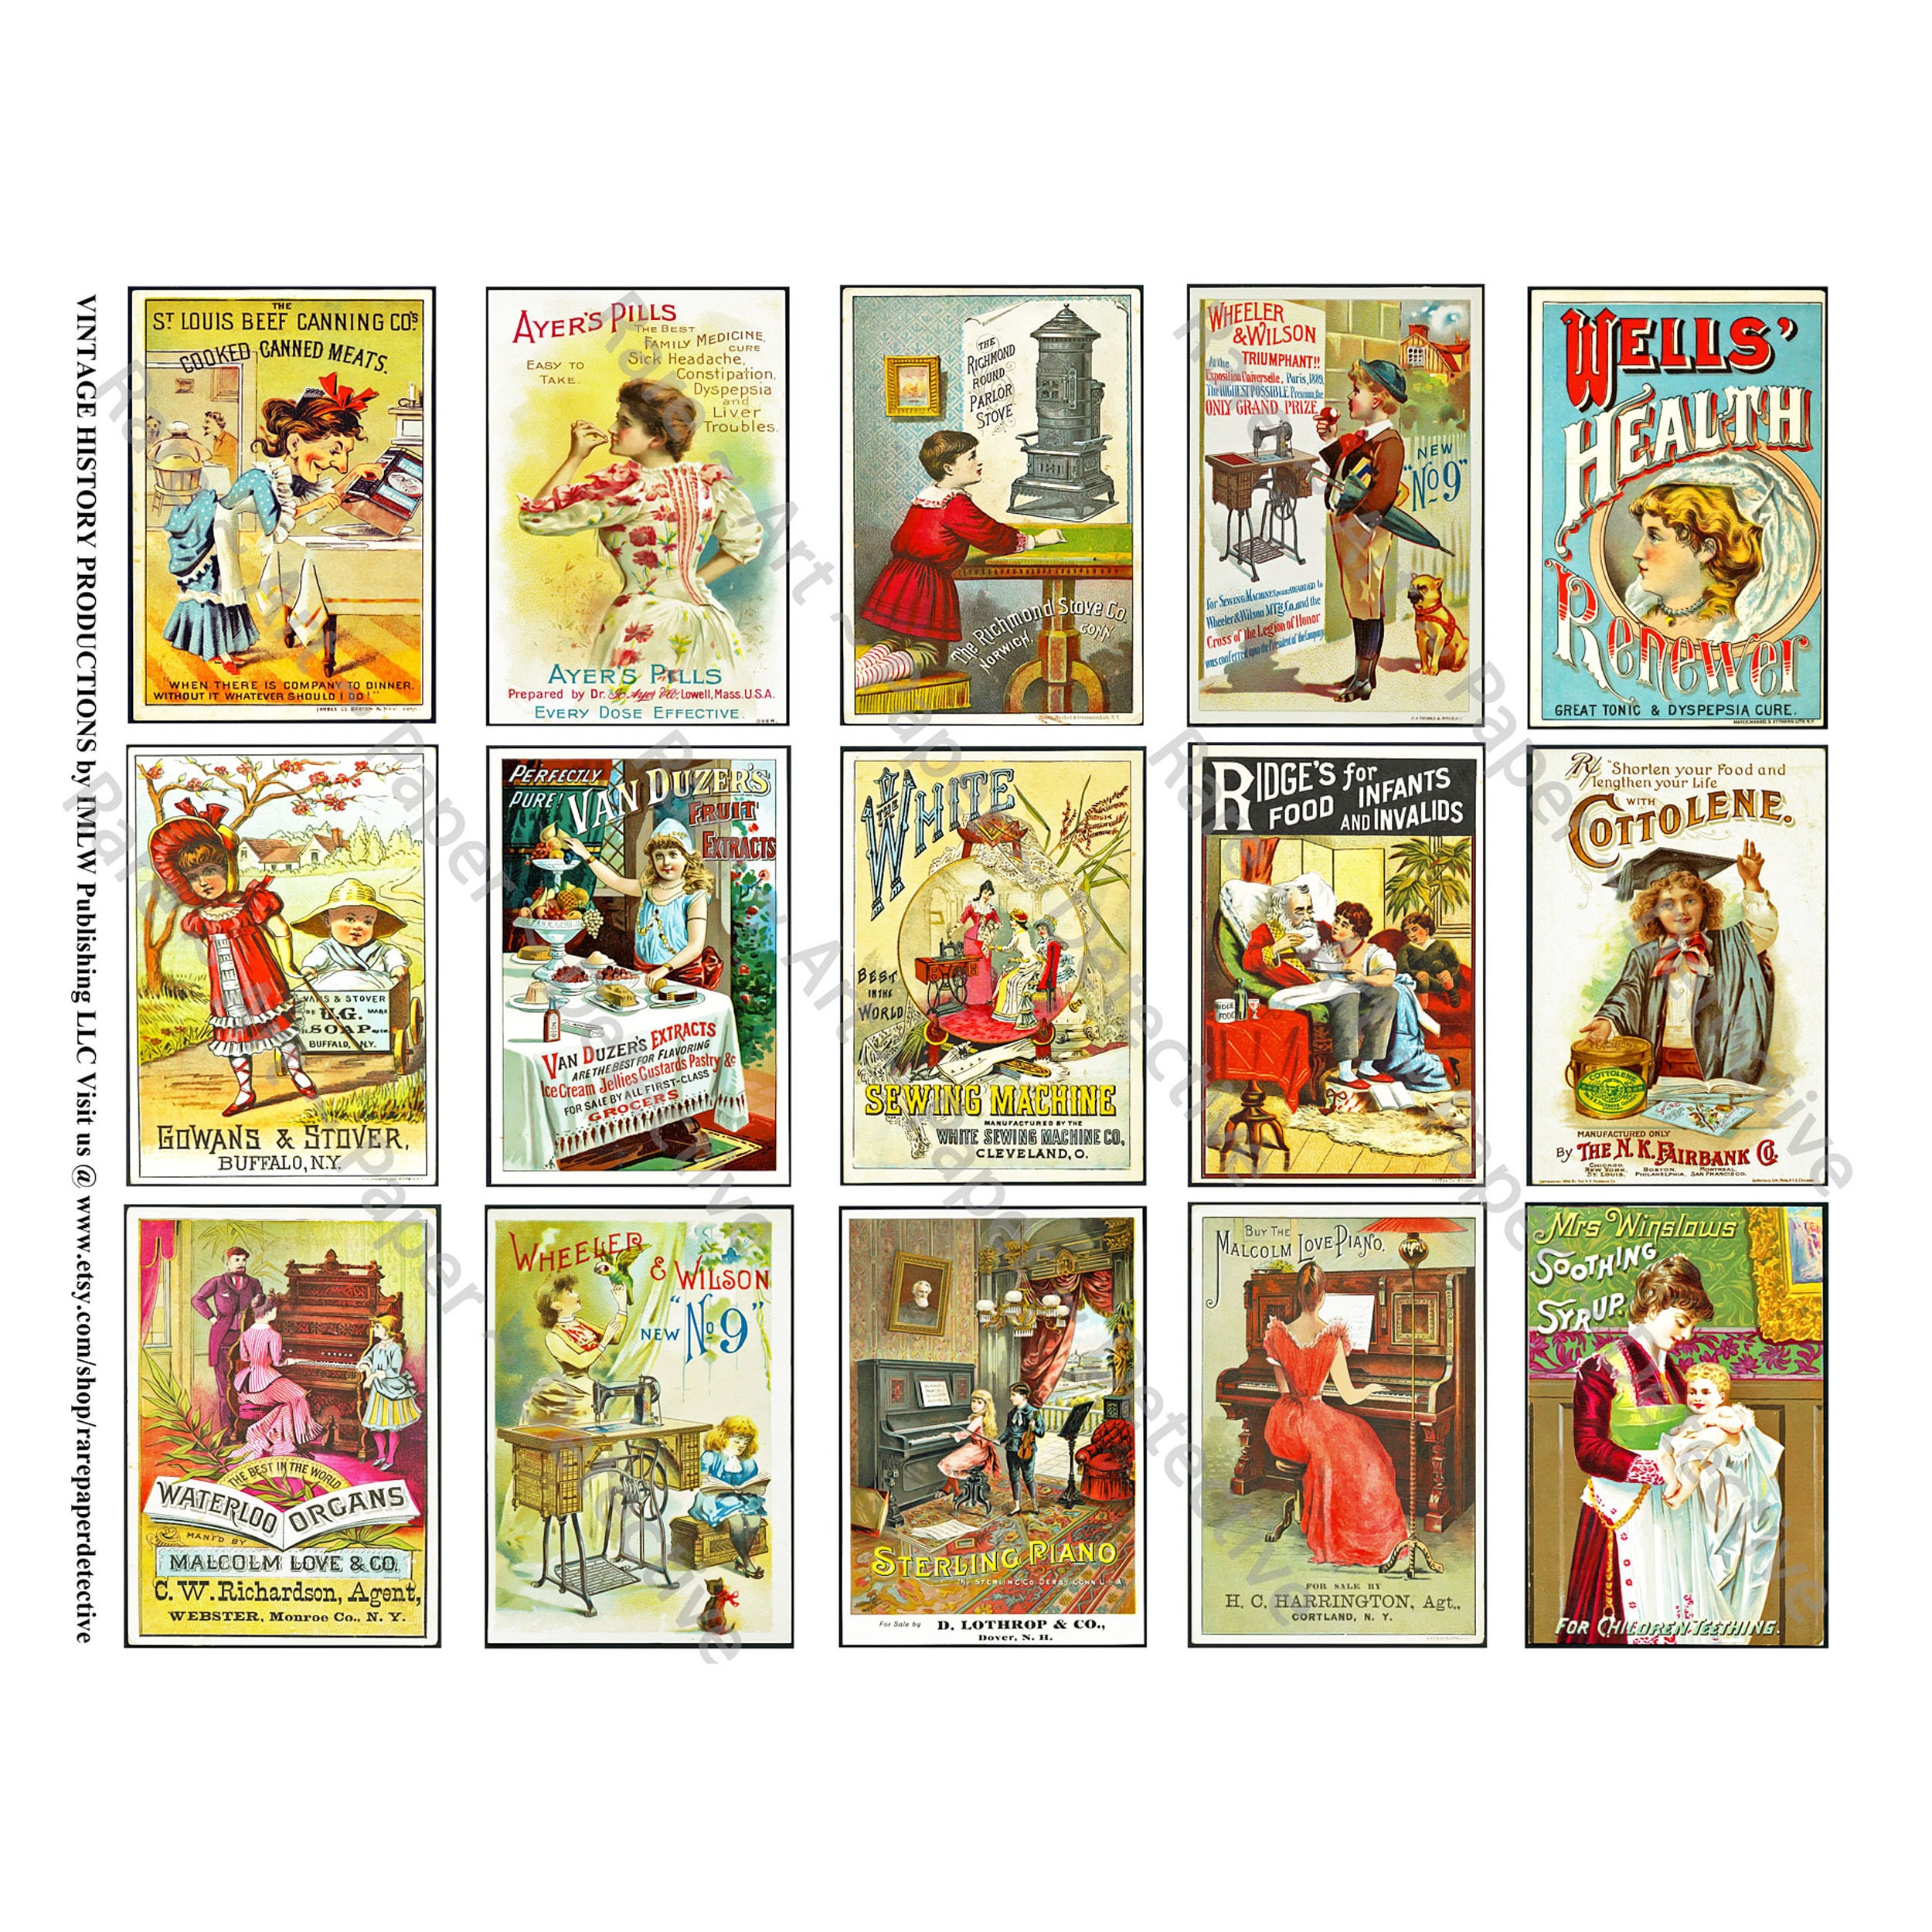 Apothecary Label Stickers, Medicine Cabinet, Vintage Pharmacy